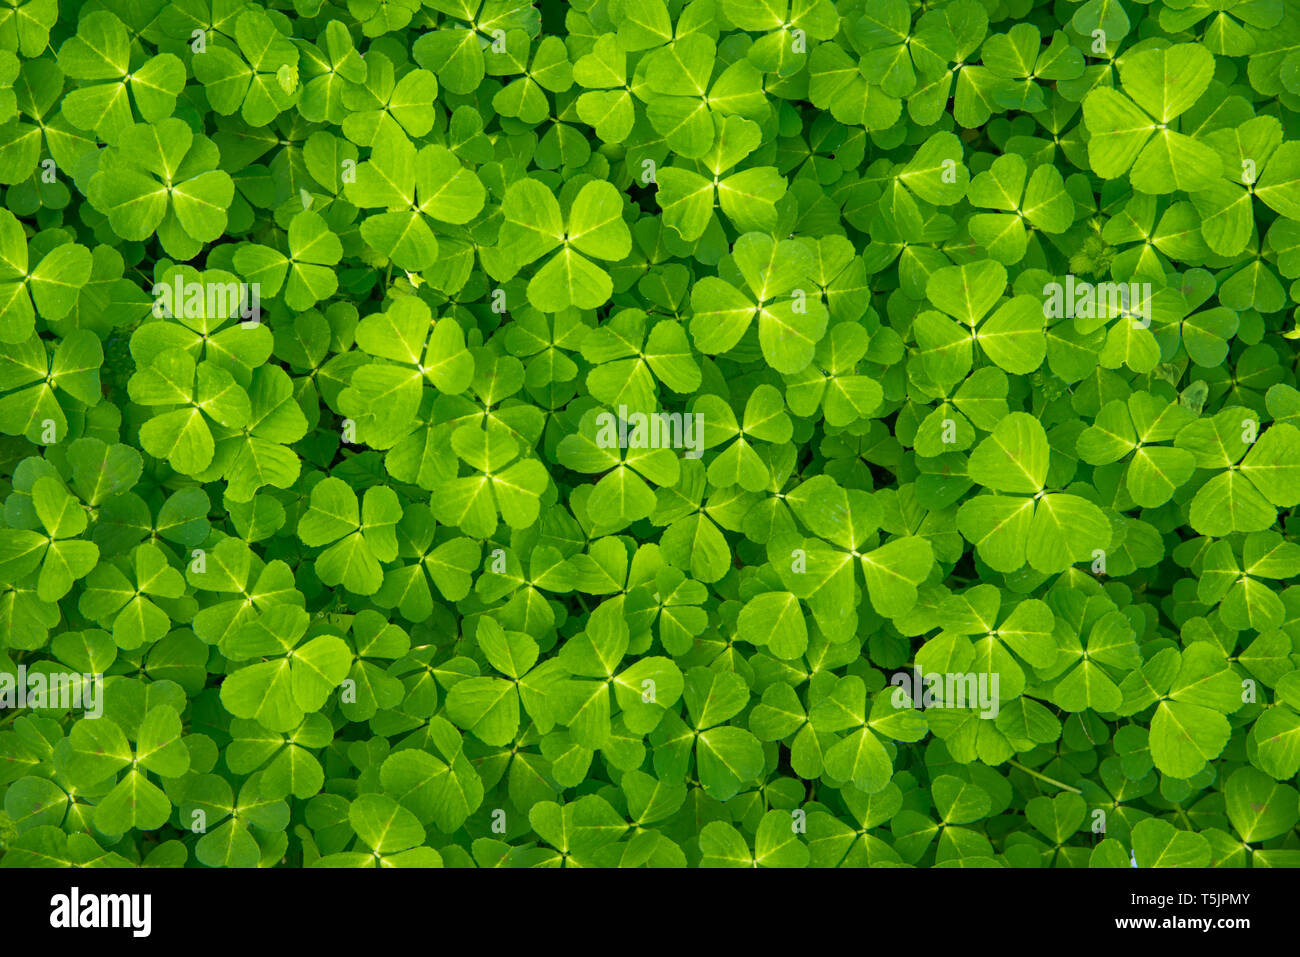 Close up of a texture of green clover. Clover background Stock Photo